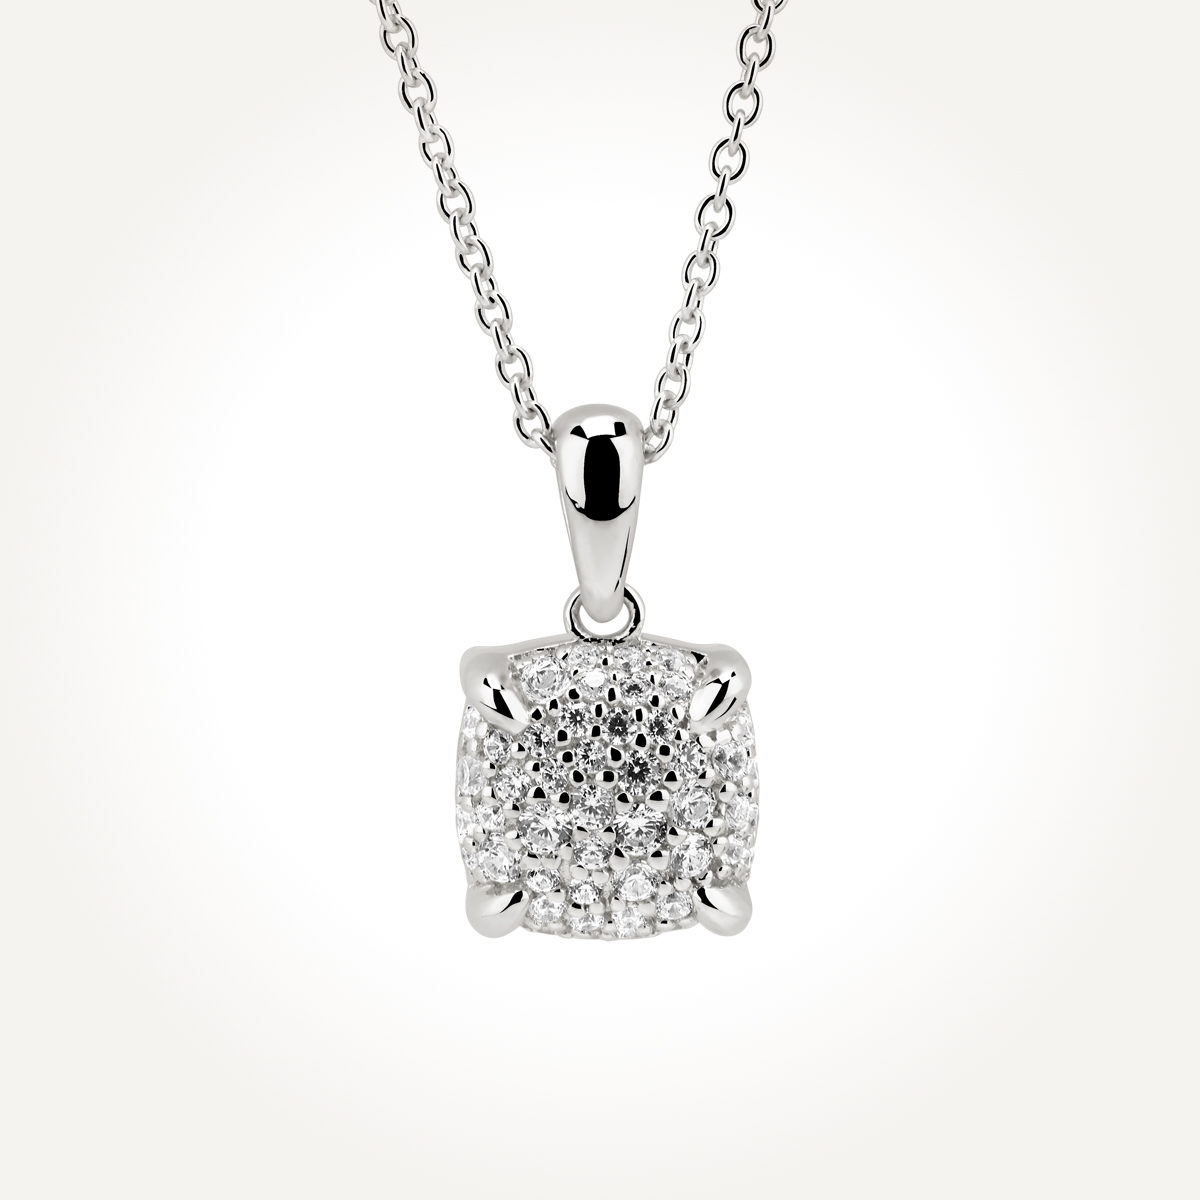 14KT White Gold Square Cluster Necklace